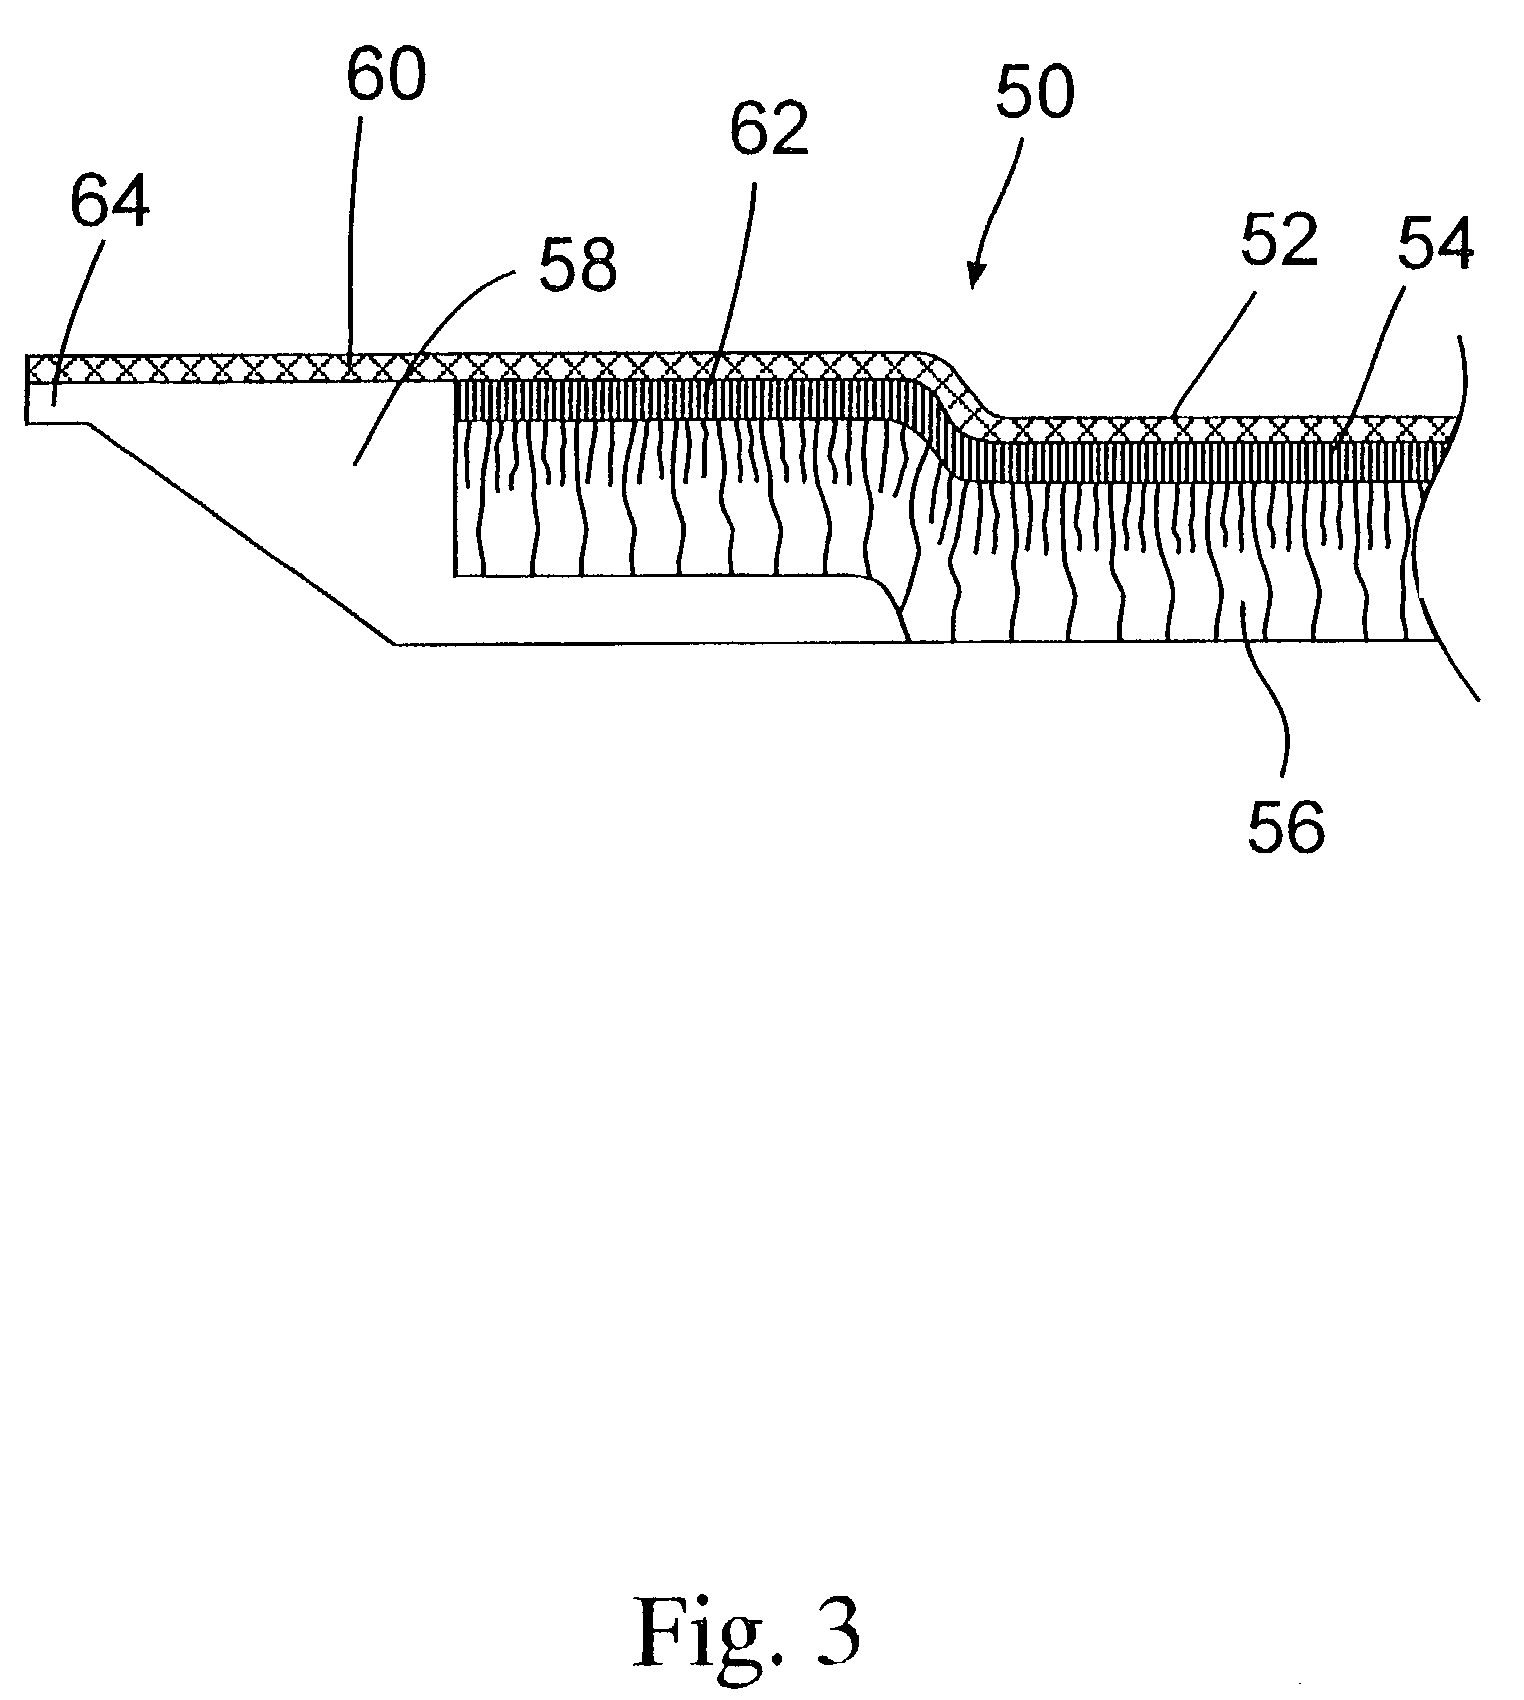 Process for making a fluid processing module